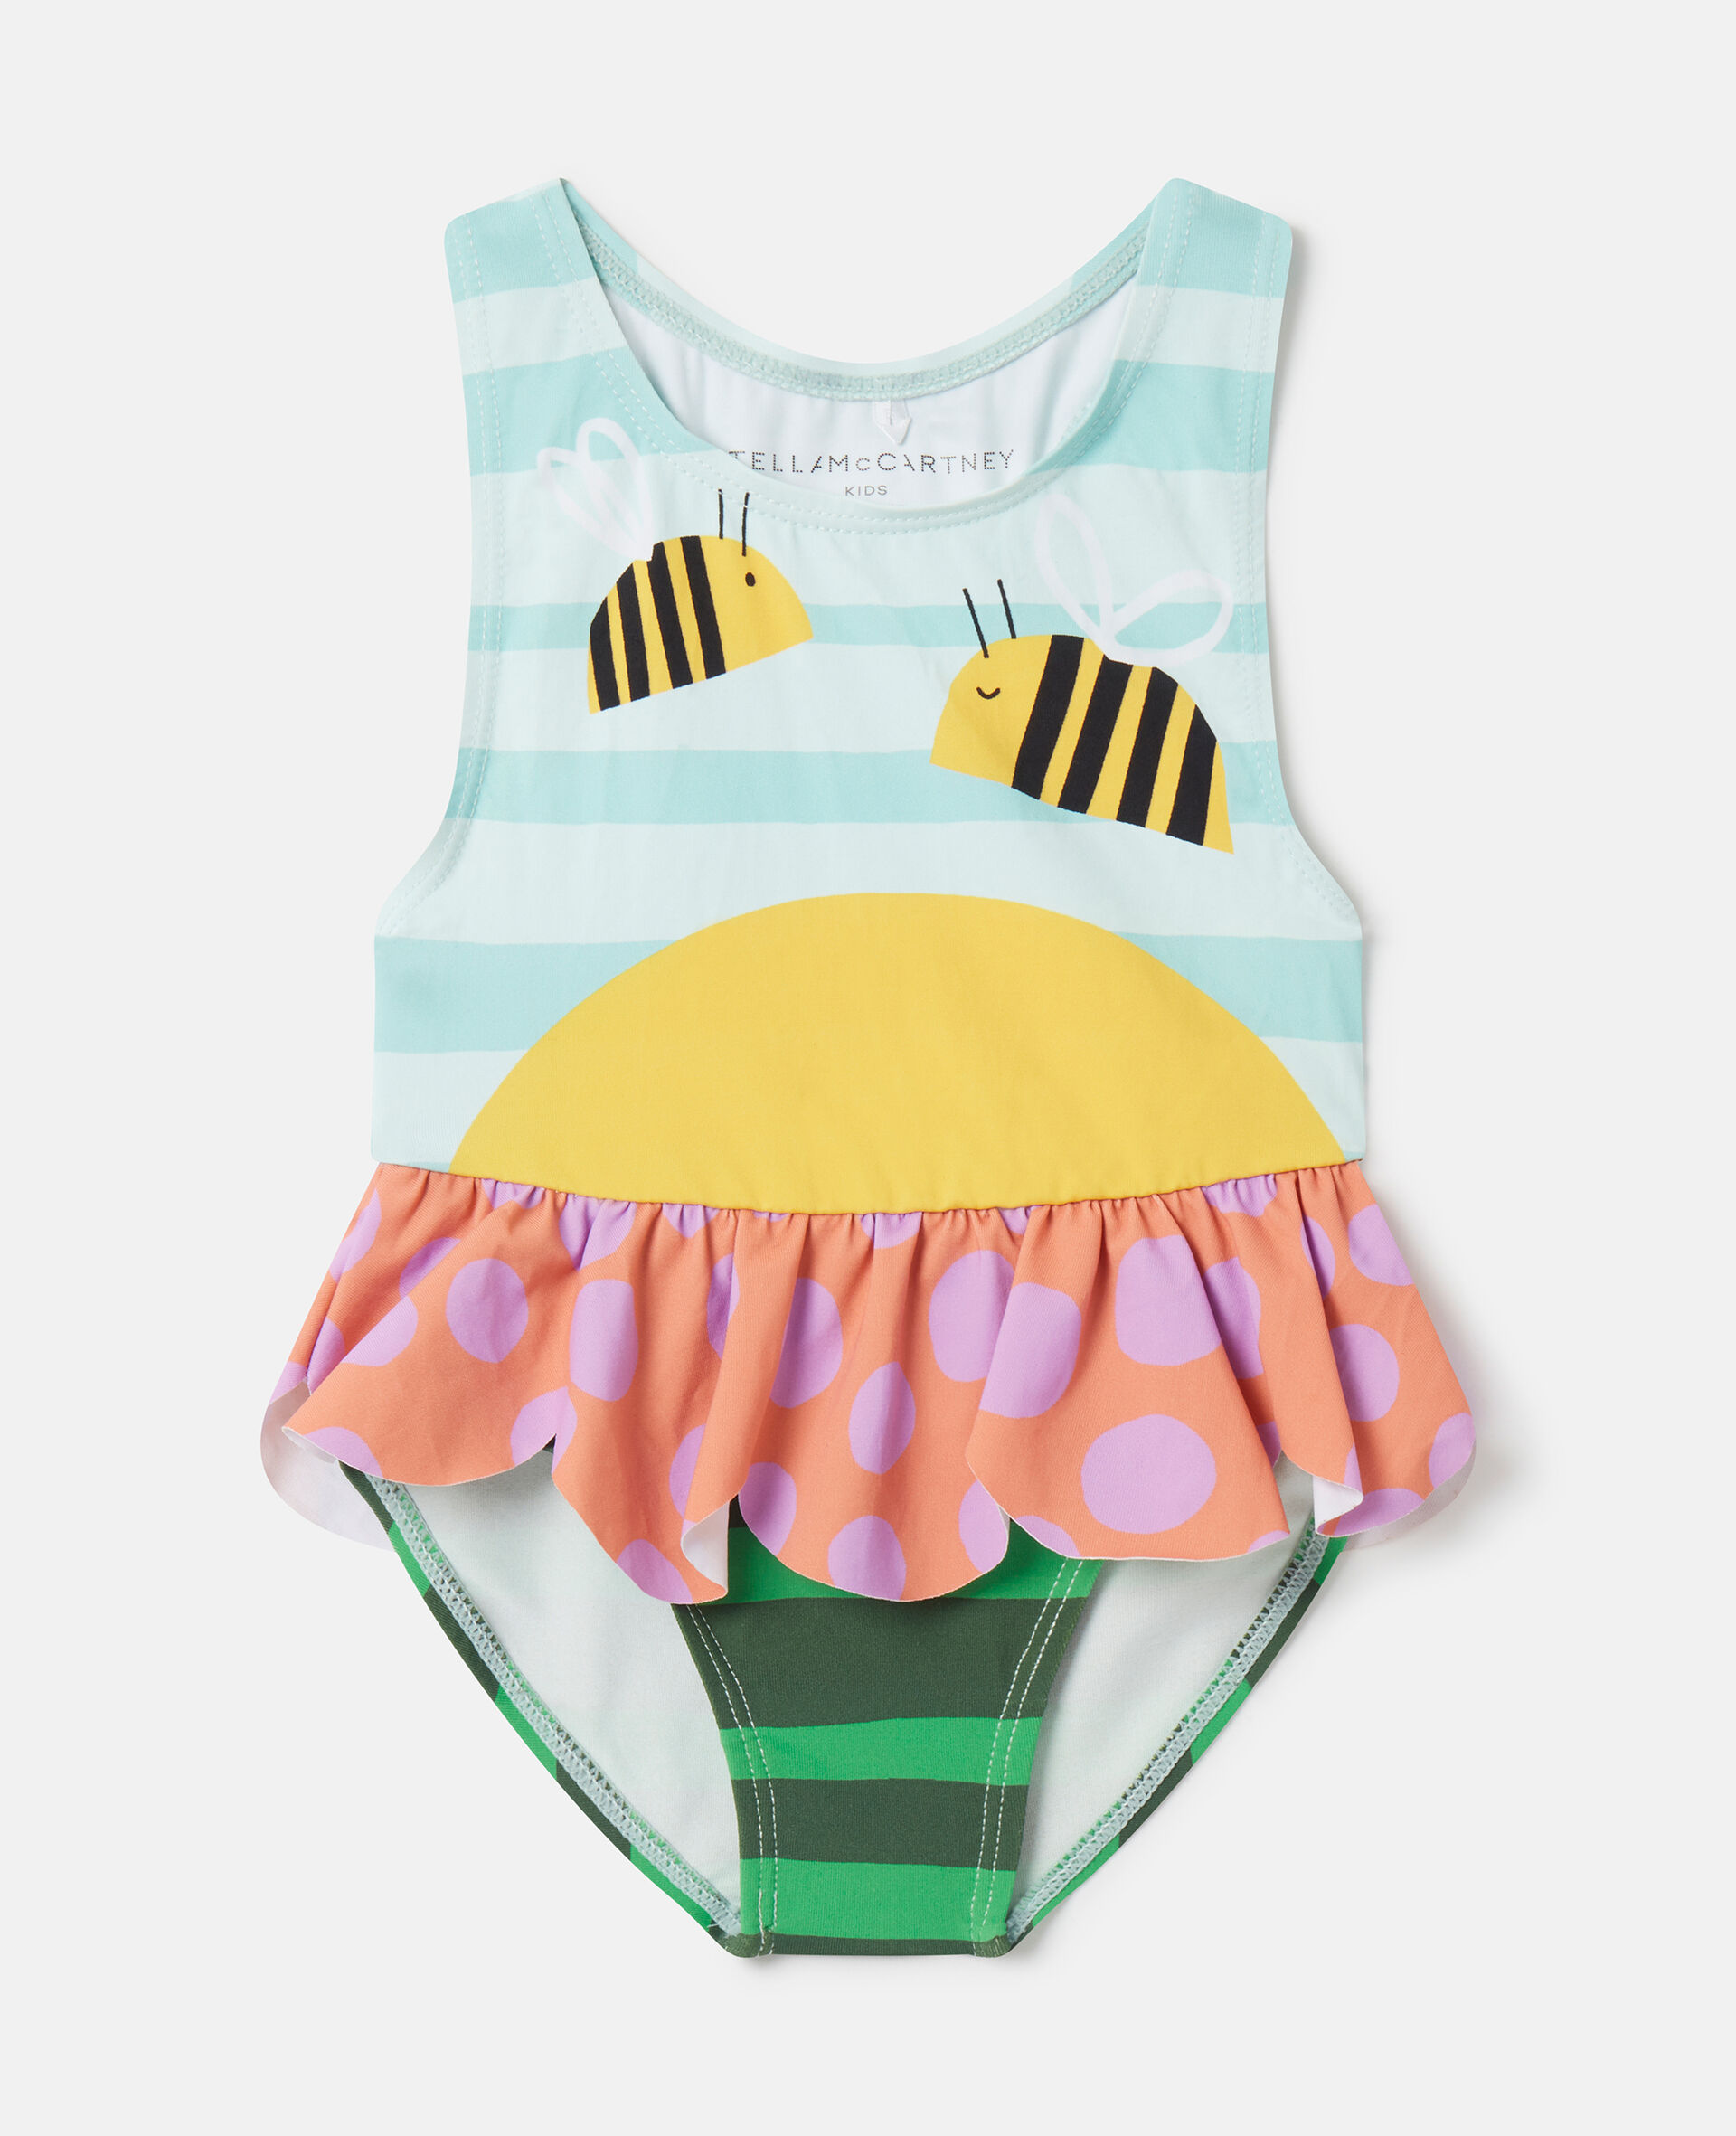 Bumblebee Landscape Print Swimsuit-Multicolored-large image number 0